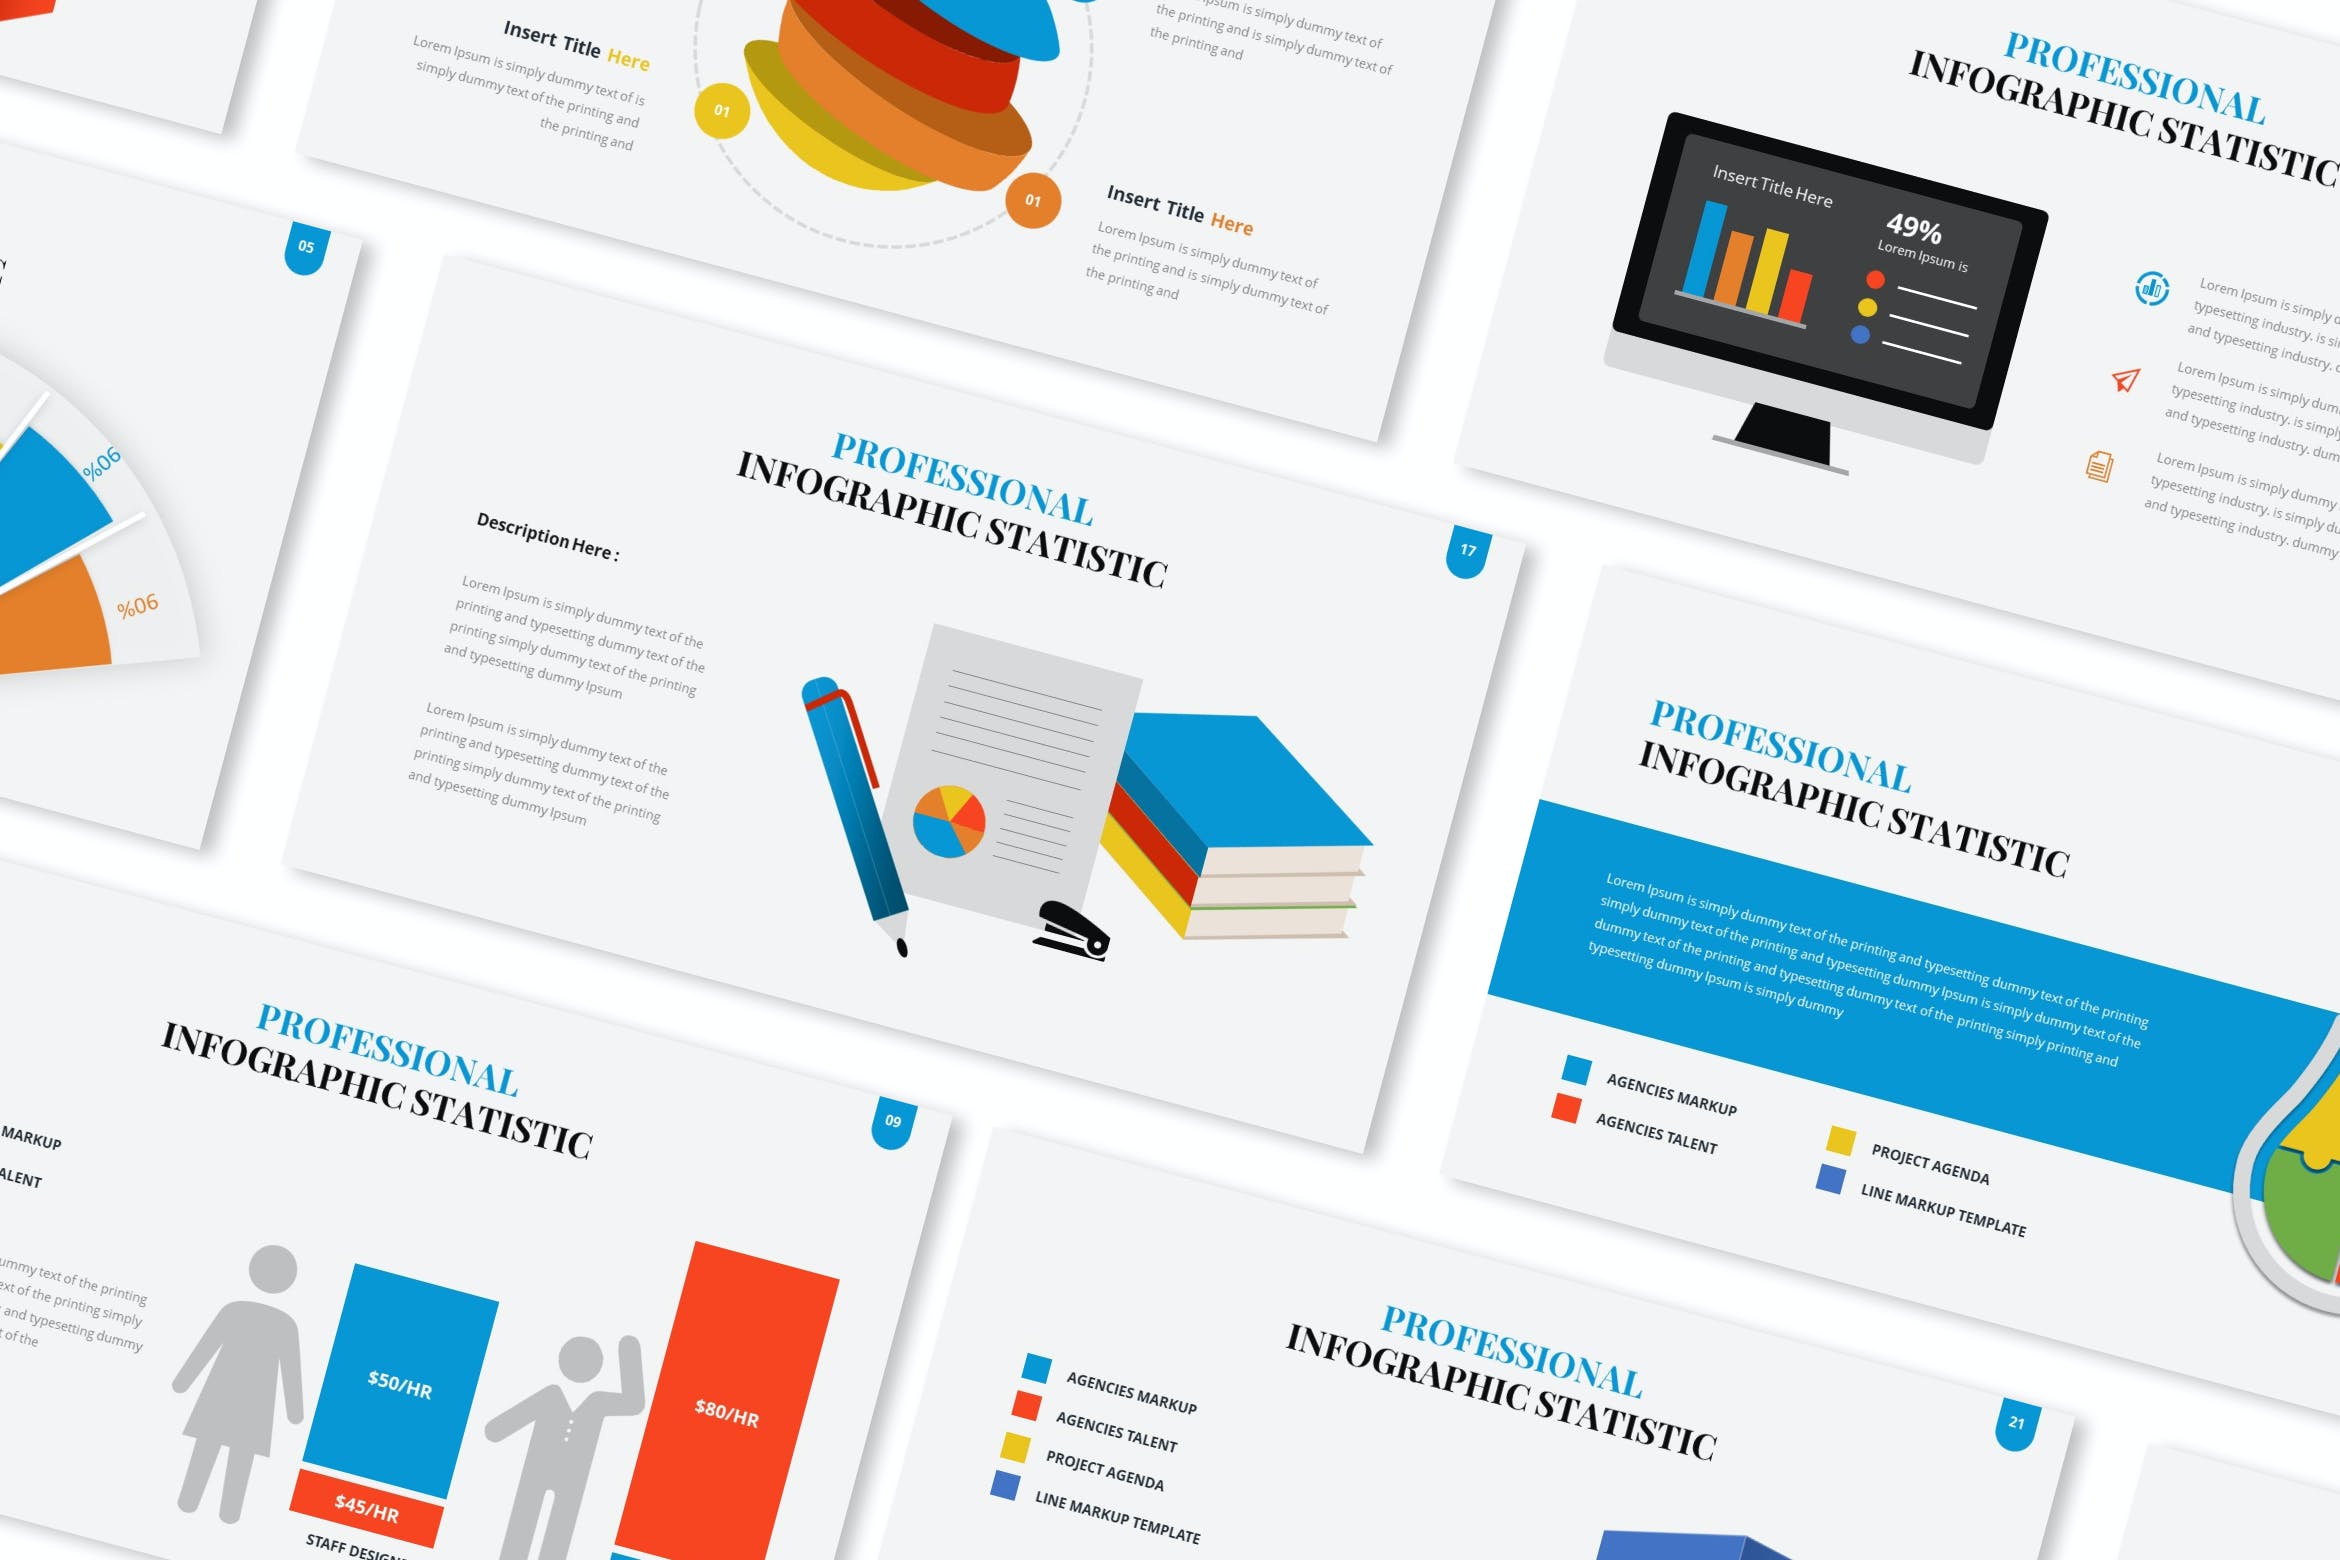 Cover image of Professional Statistic Infographic PowerPoint Template.